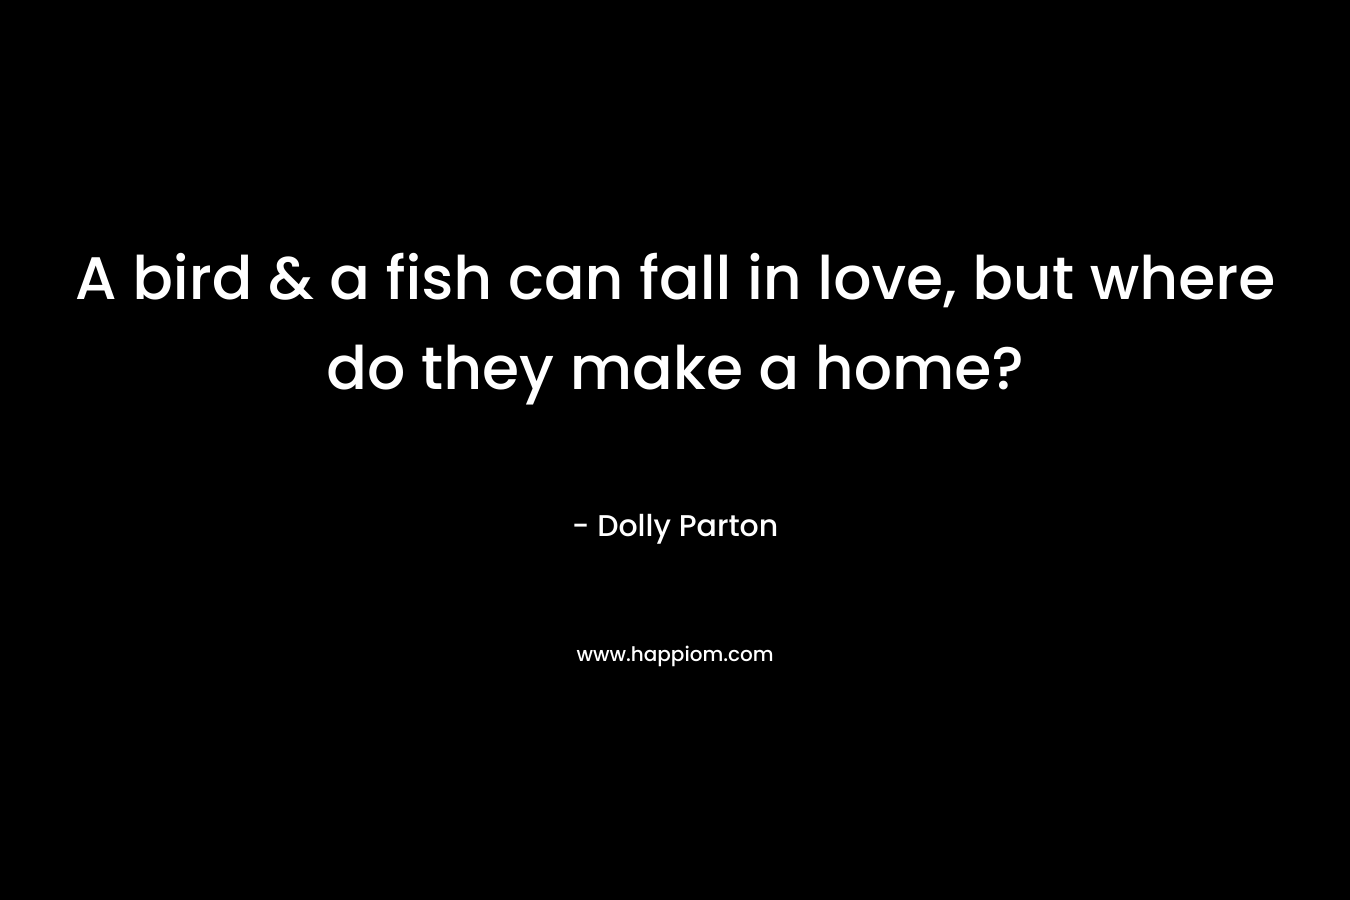 A bird & a fish can fall in love, but where do they make a home? – Dolly Parton